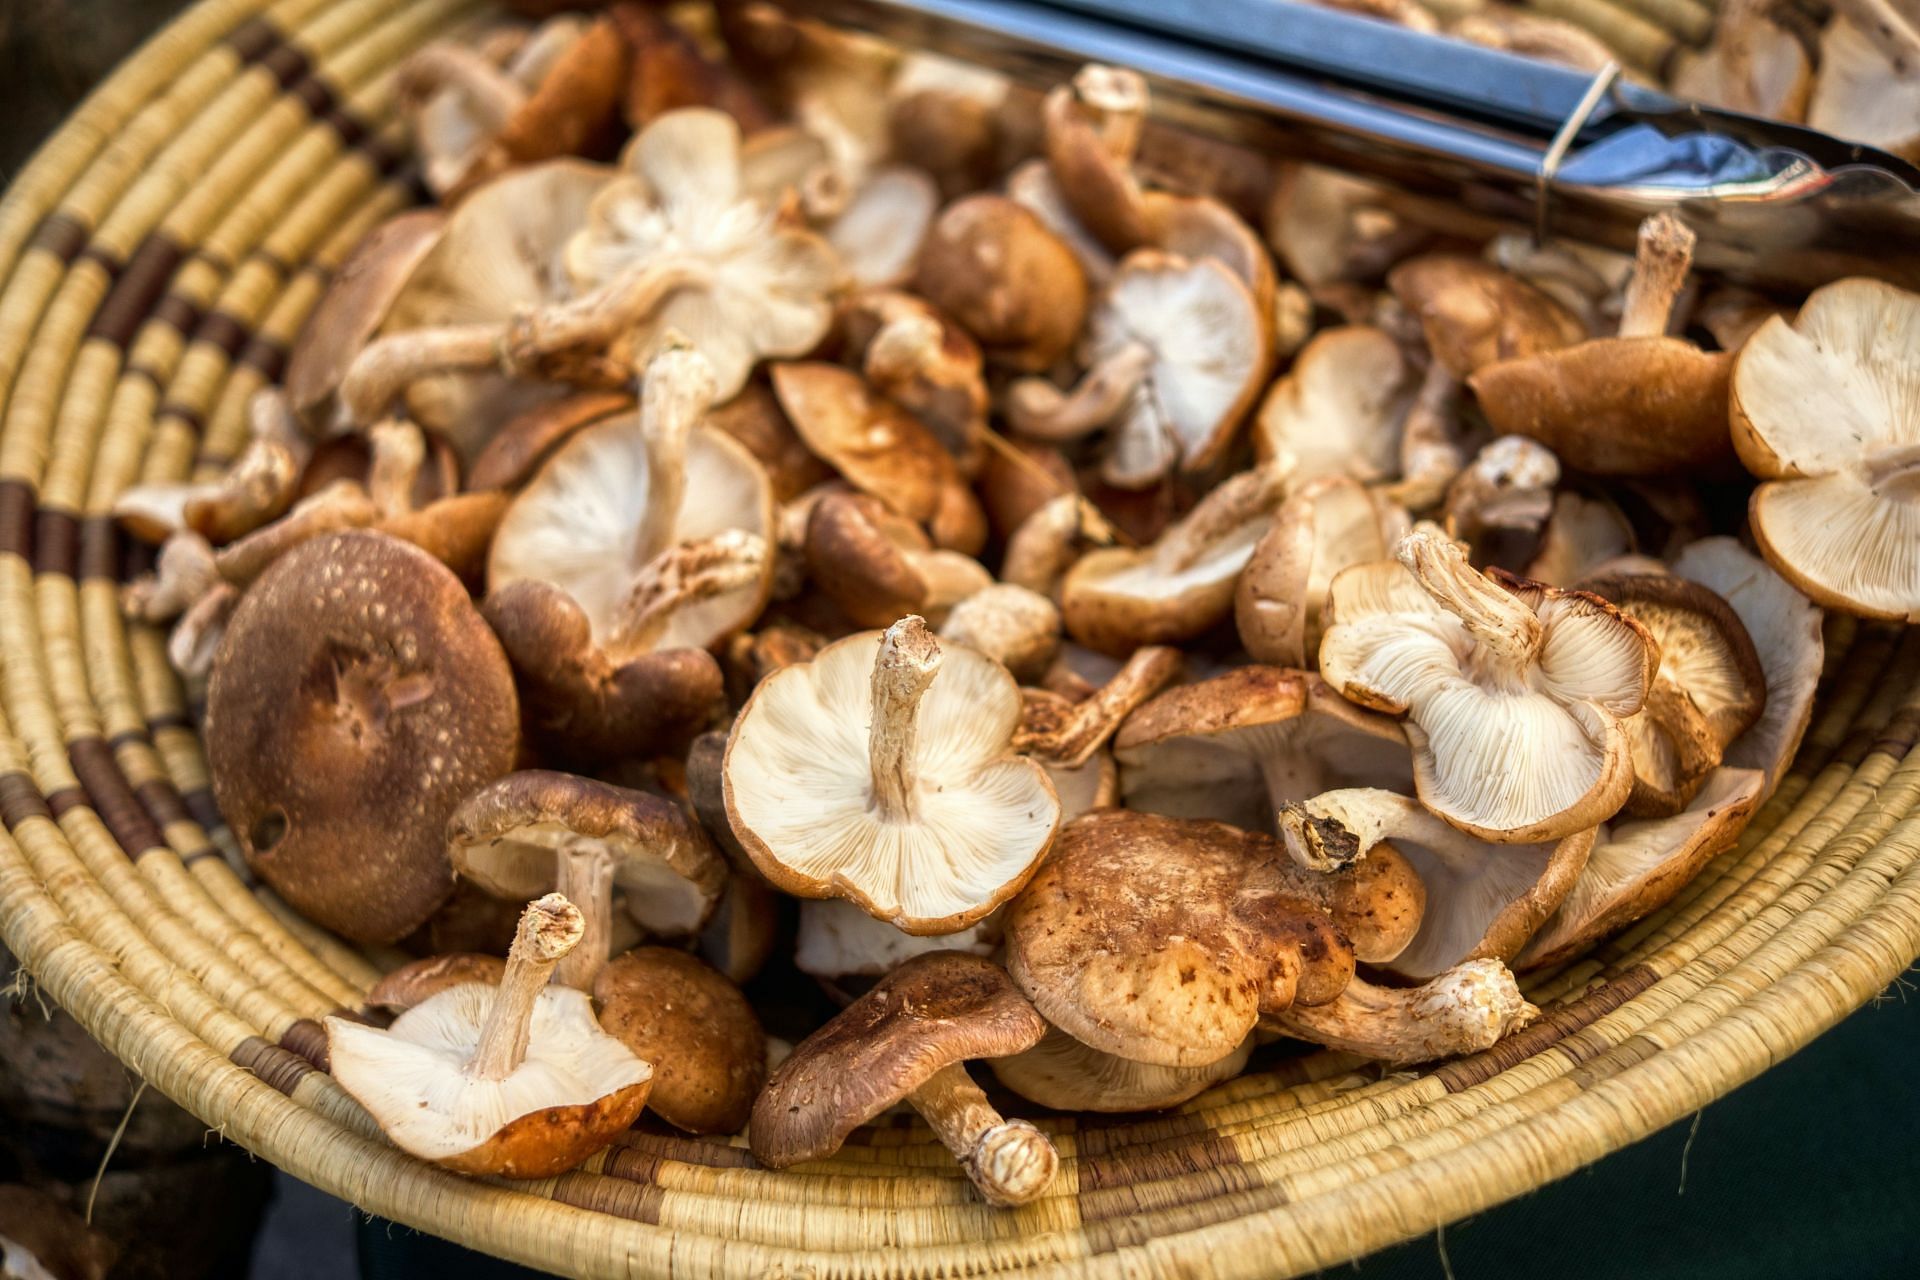 Any type pf uncooked mushrooms can be harmful to your body (Image via Unsplash/ Yuval Zukerman)